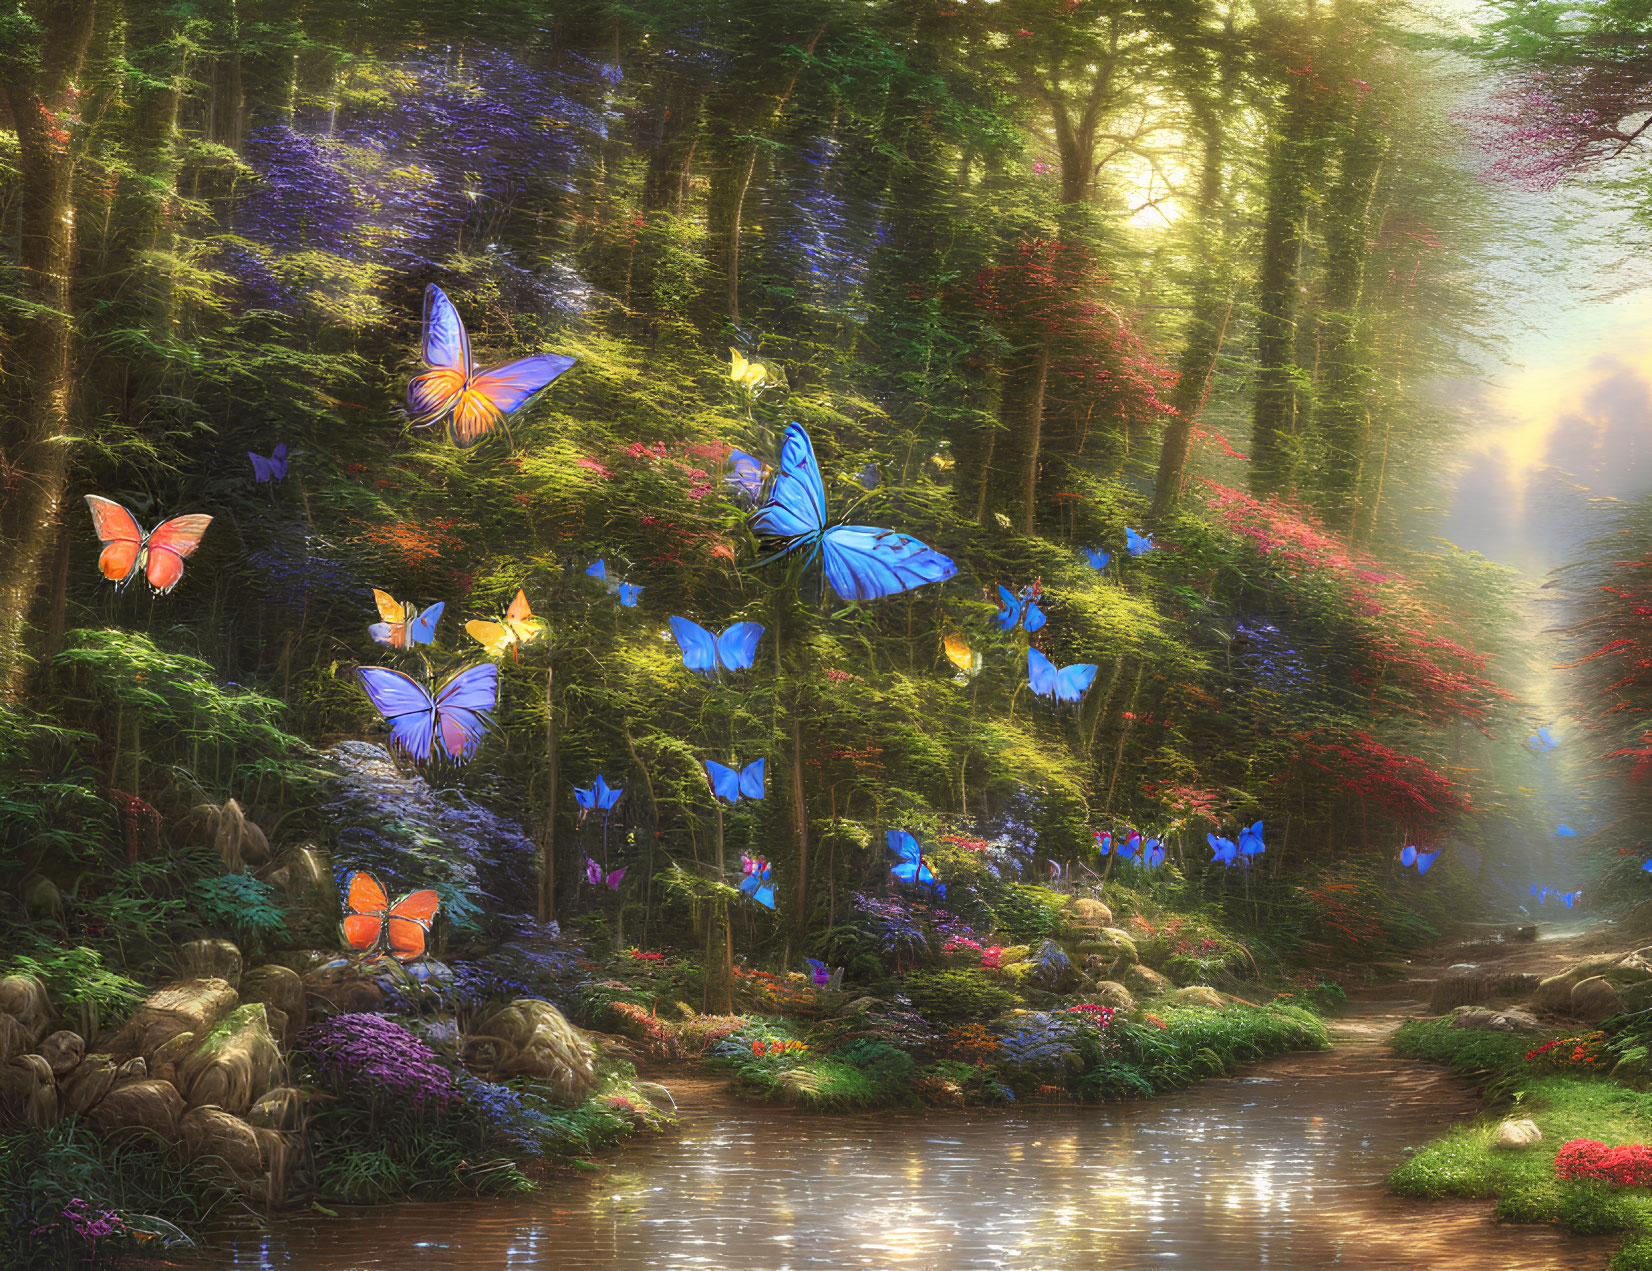 Enchanting forest scene with butterflies, sunlit path, greenery, flowers, and stream